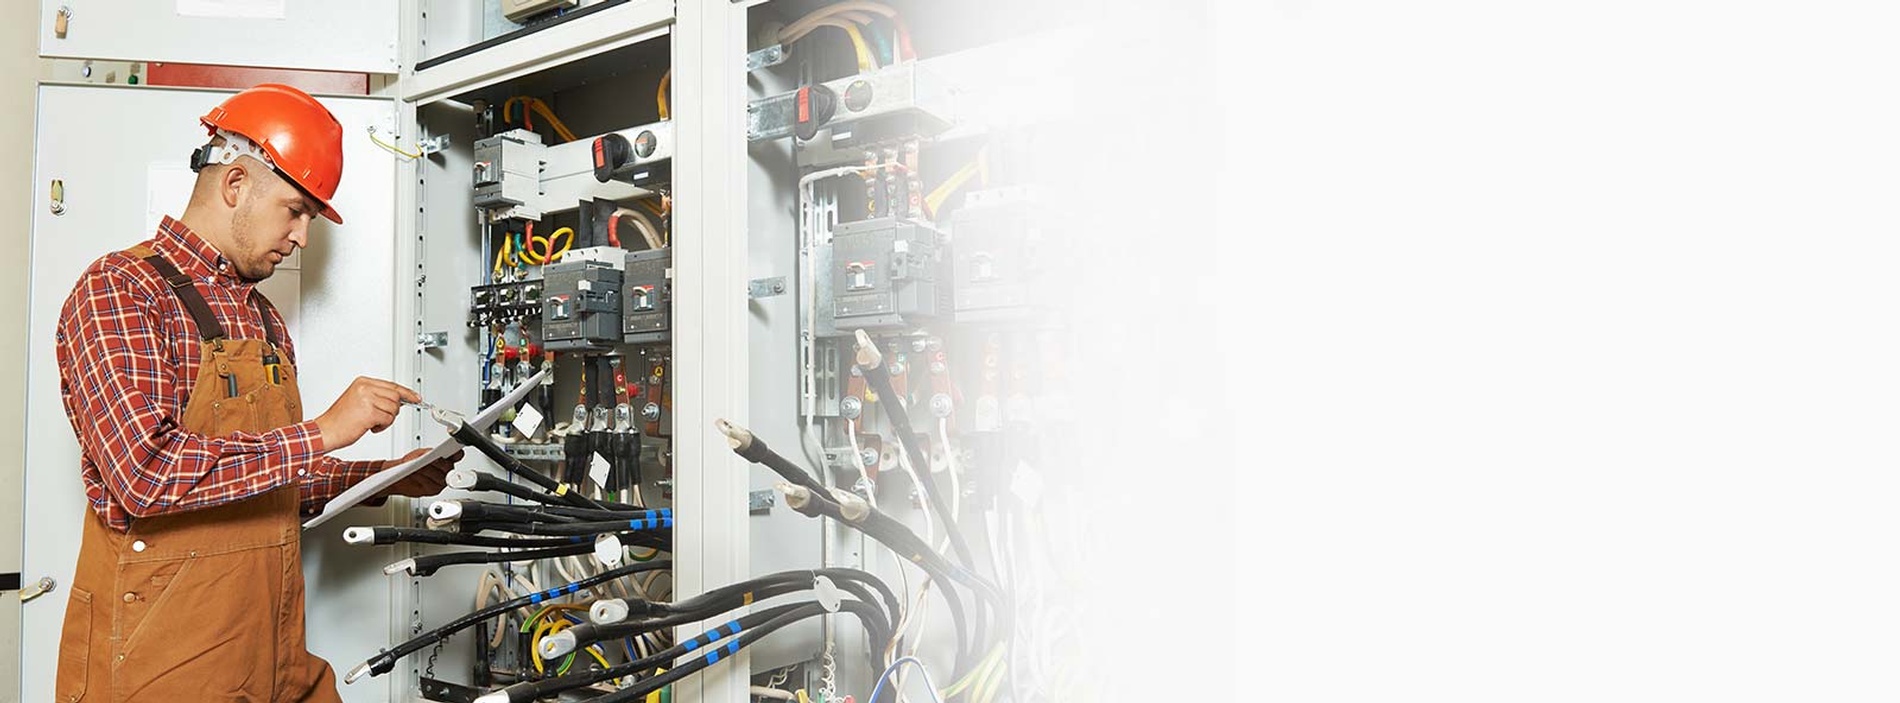 Our Electricians, Electrical Contractors provide useful and important links about Electrical Services